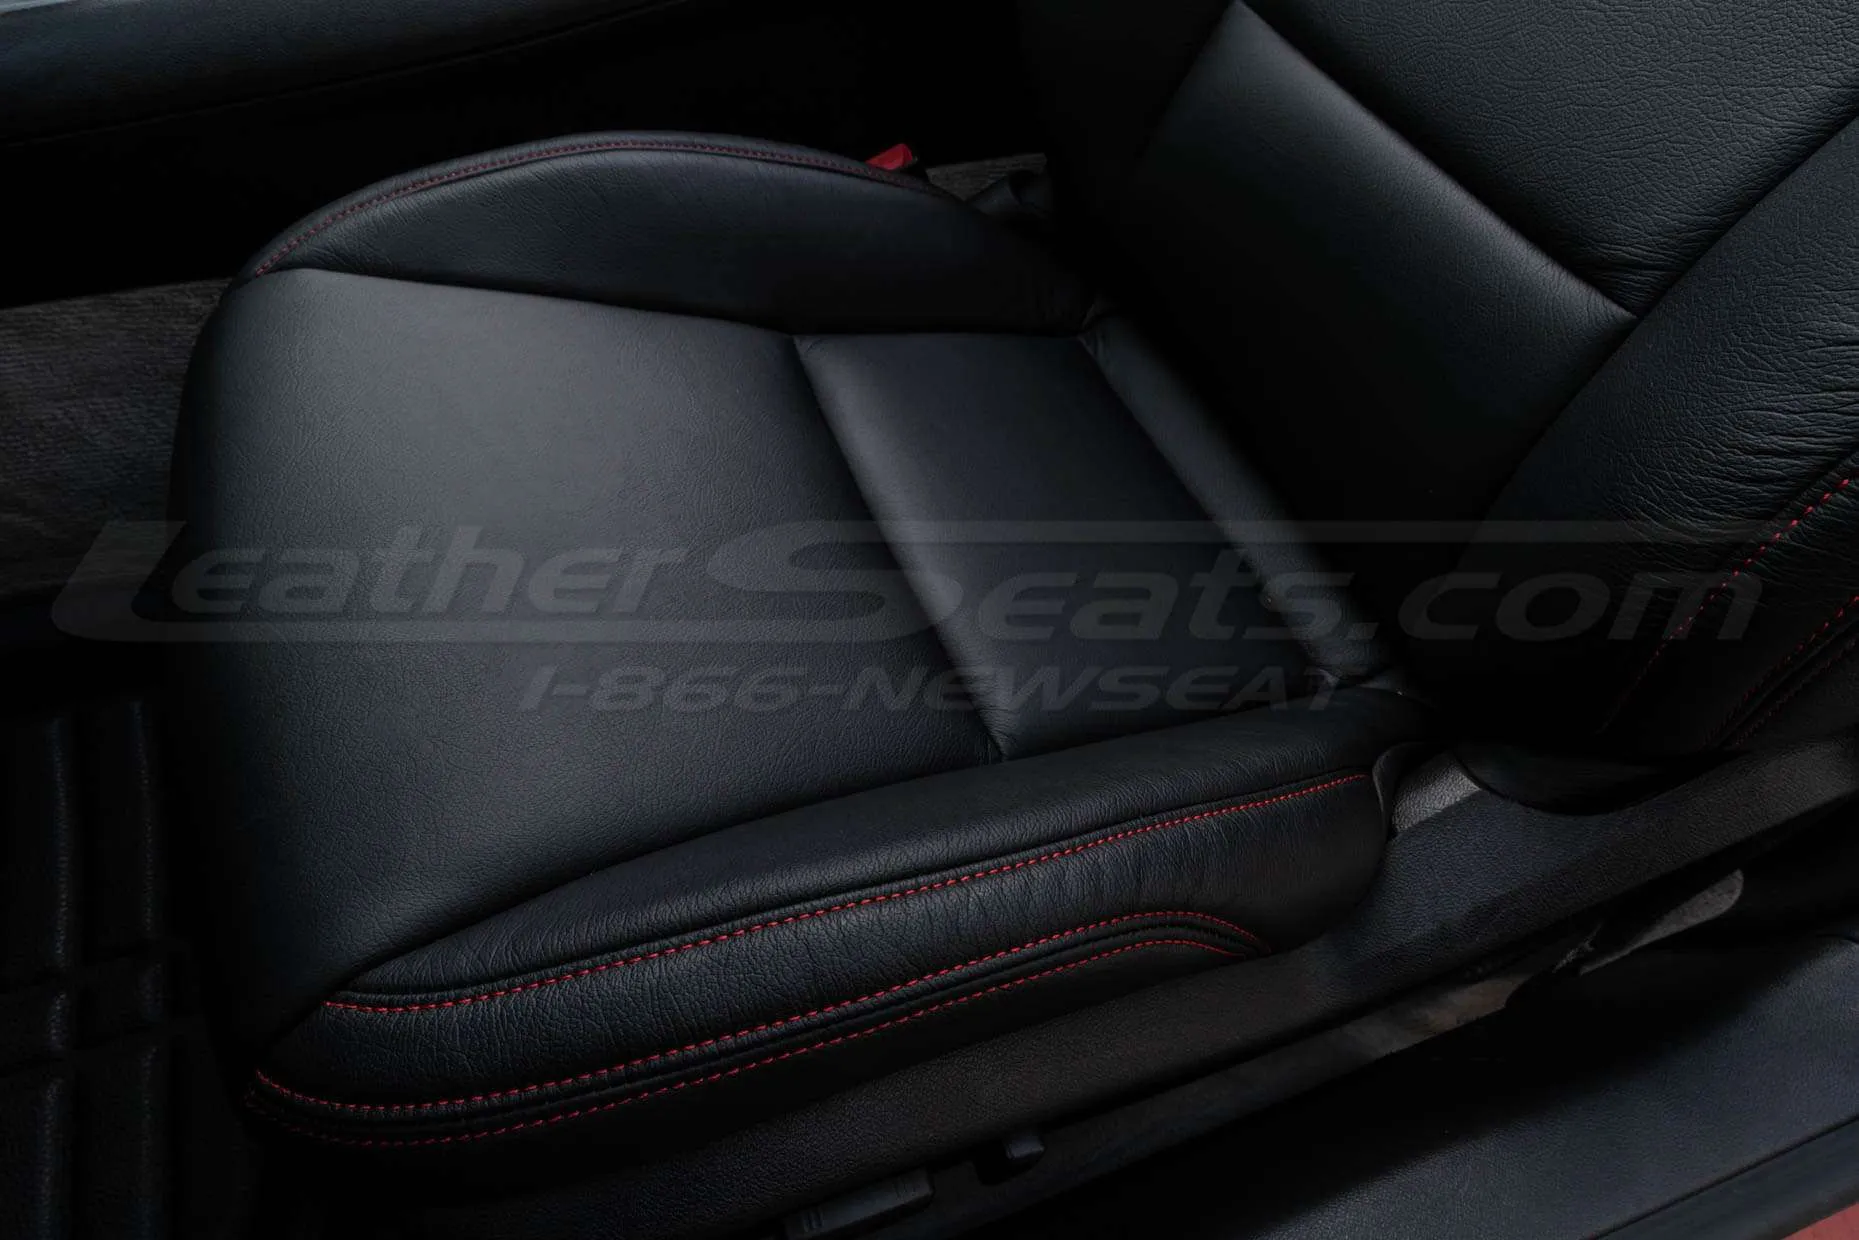 Leather seat cushion with Cardinal stitching